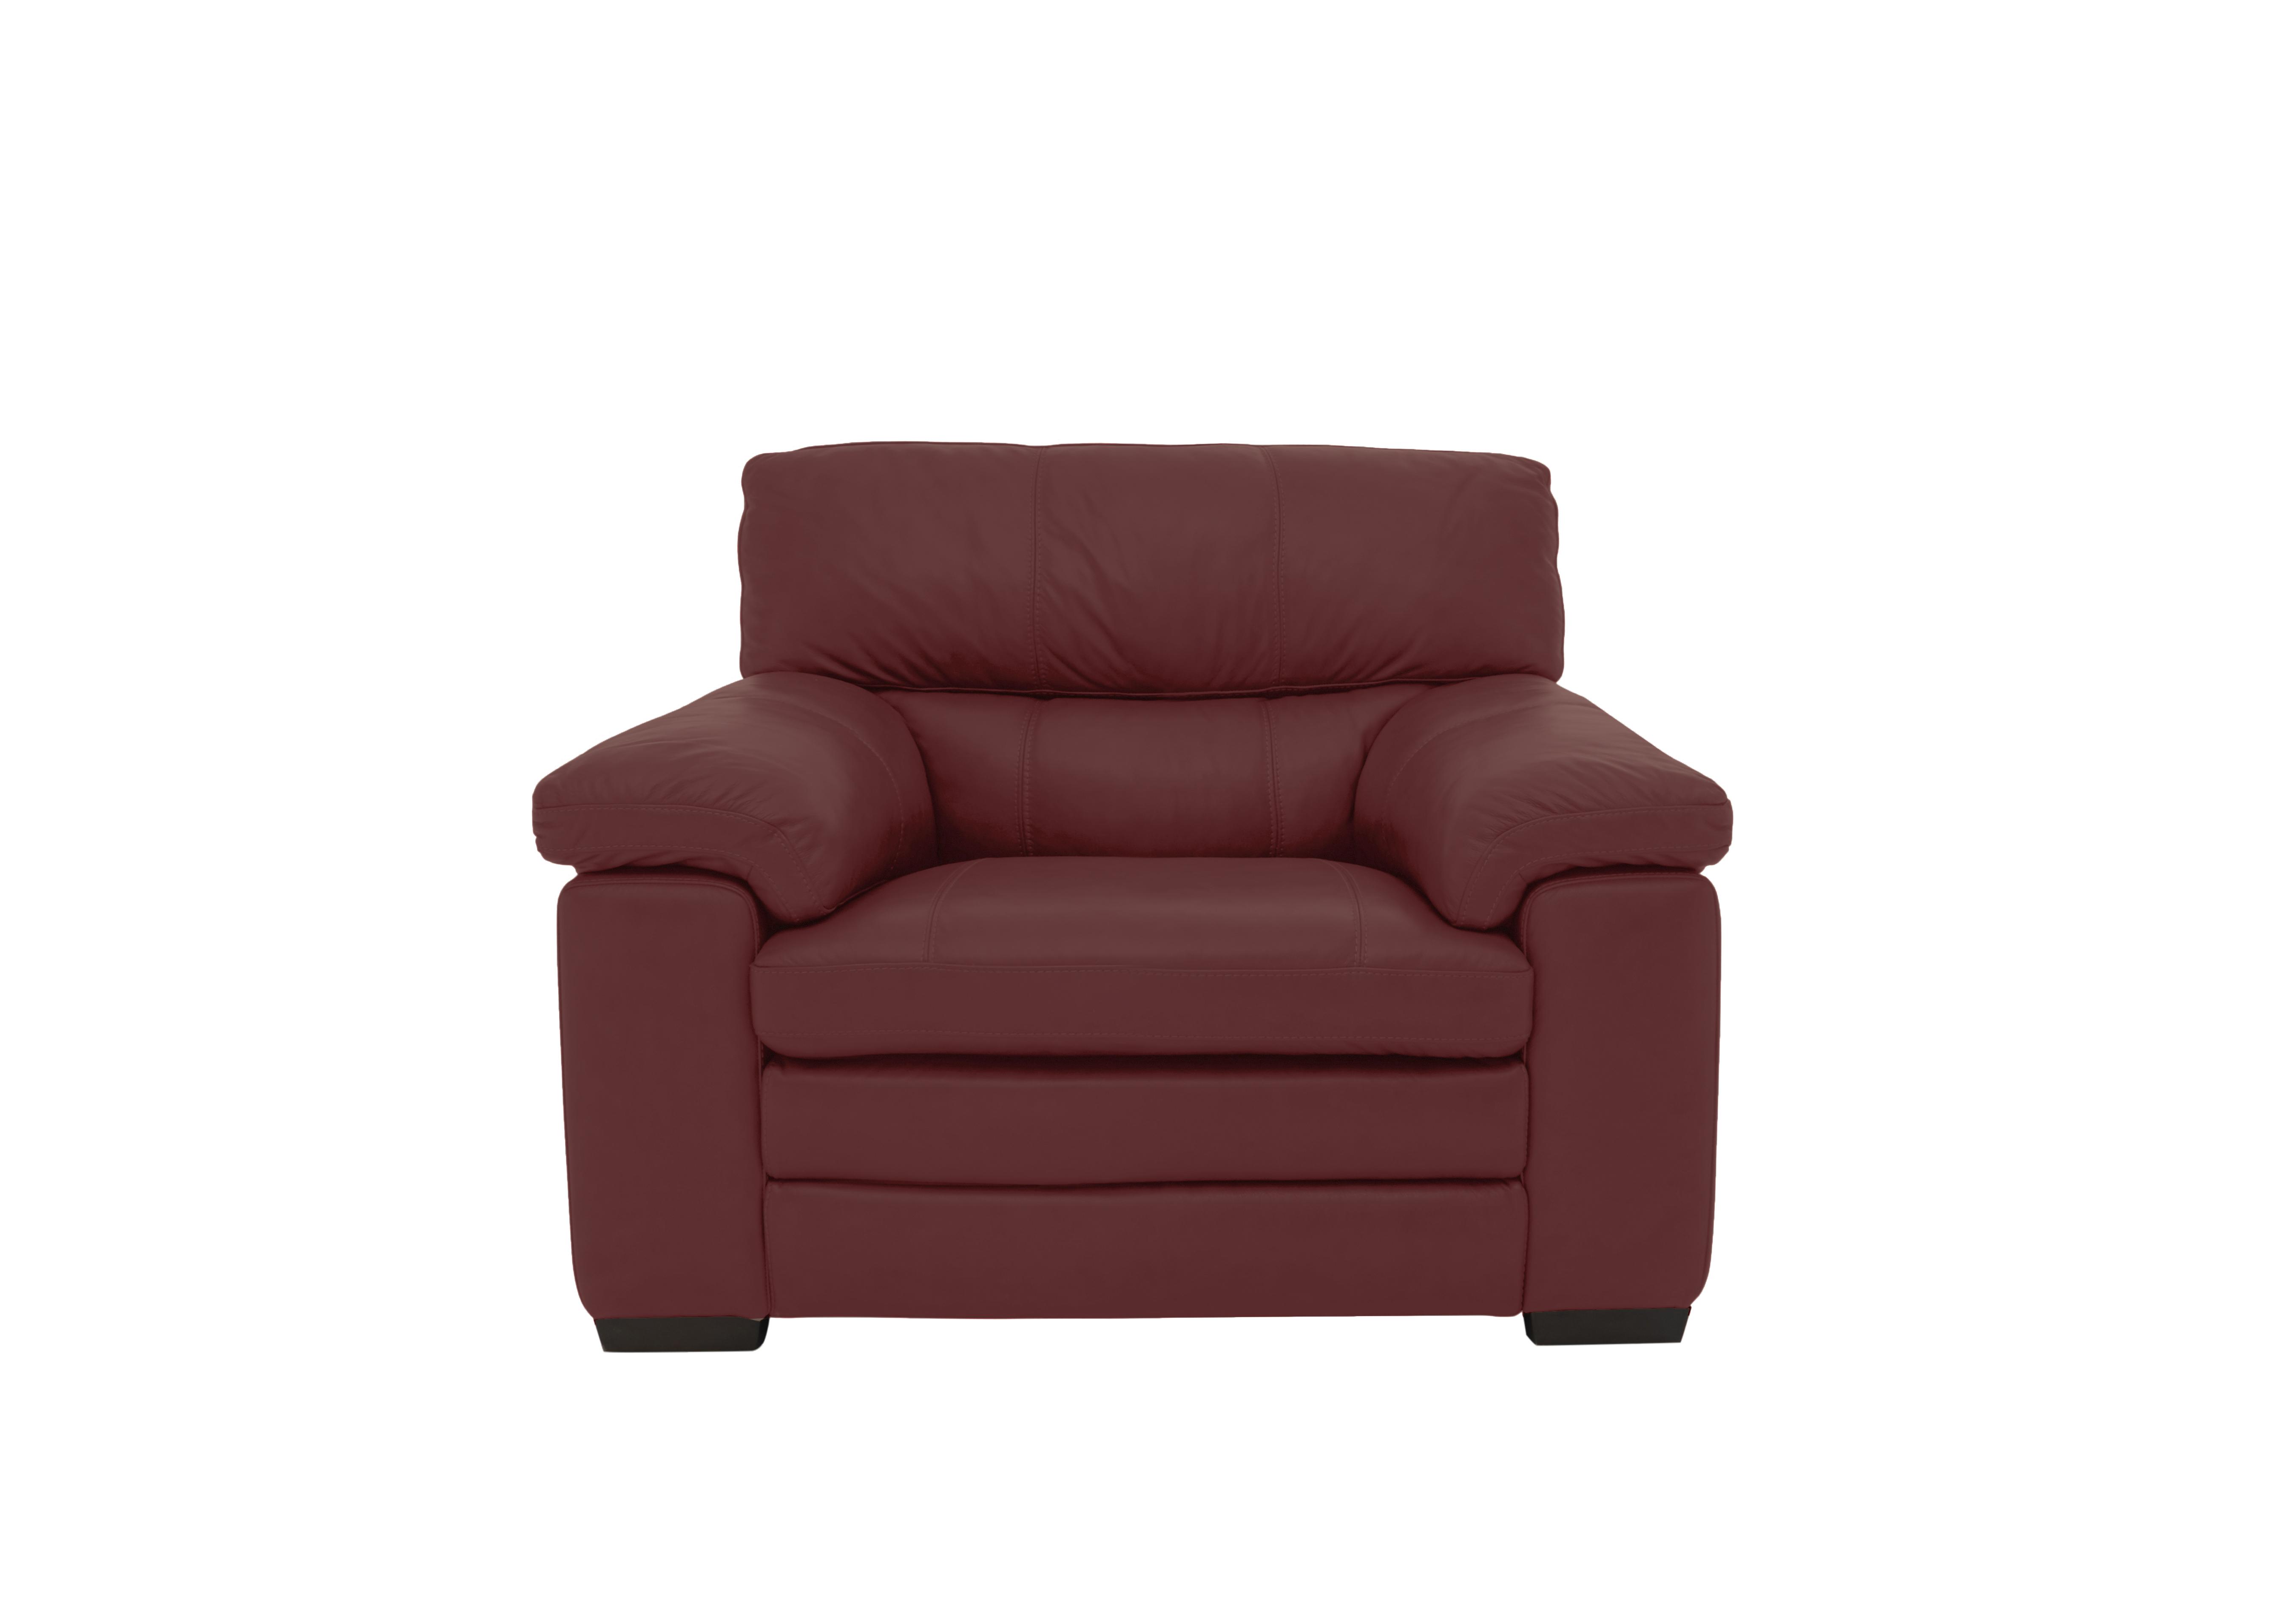 Cozee Leather Armchair in Bv-035c Deep Red on Furniture Village